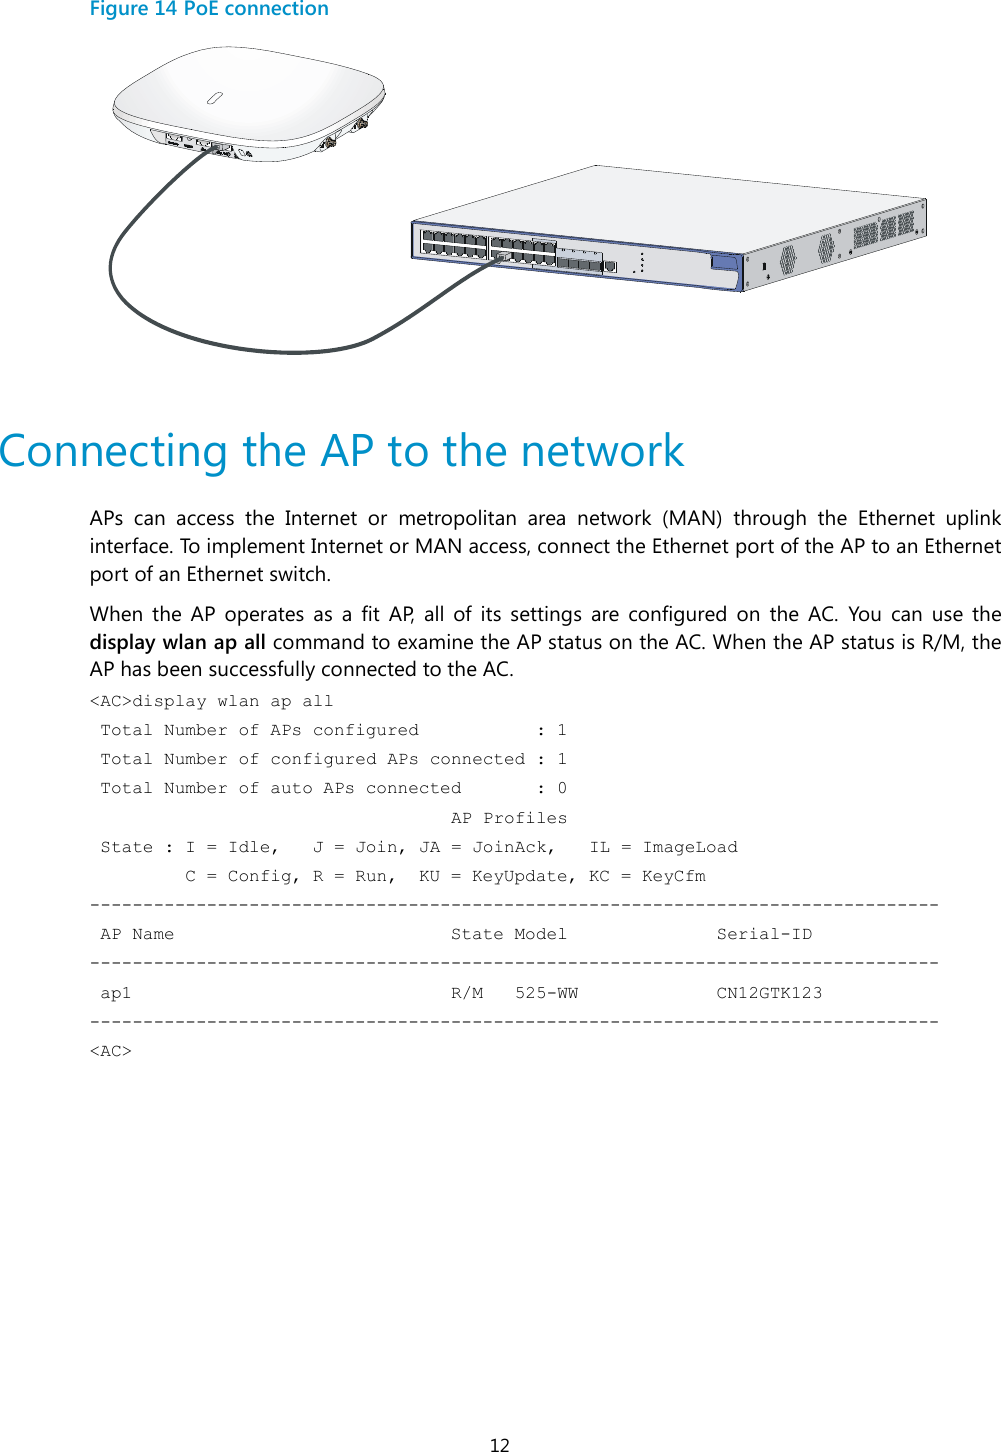  12 Figure 14 PoE connection    Connecting the AP to the network APs  can  access  the  Internet  or  metropolitan  area  network  (MAN)  through  the  Ethernet  uplink interface. To implement Internet or MAN access, connect the Ethernet port of the AP to an Ethernet port of an Ethernet switch. When  the  AP  operates  as  a  fit  AP,  all  of  its  settings  are  configured  on  the  AC.  You  can  use  the display wlan ap all command to examine the AP status on the AC. When the AP status is R/M, the AP has been successfully connected to the AC. &lt;AC&gt;display wlan ap all                                                           Total Number of APs configured           : 1                                     Total Number of configured APs connected : 1                                     Total Number of auto APs connected       : 0                                                                      AP Profiles                                     State : I = Idle,   J = Join, JA = JoinAck,   IL = ImageLoad                             C = Config, R = Run,  KU = KeyUpdate, KC = KeyCfm                       --------------------------------------------------------------------------------  AP Name                          State Model              Serial-ID             --------------------------------------------------------------------------------  ap1                              R/M   525-WW             CN12GTK123 -------------------------------------------------------------------------------- &lt;AC&gt;    